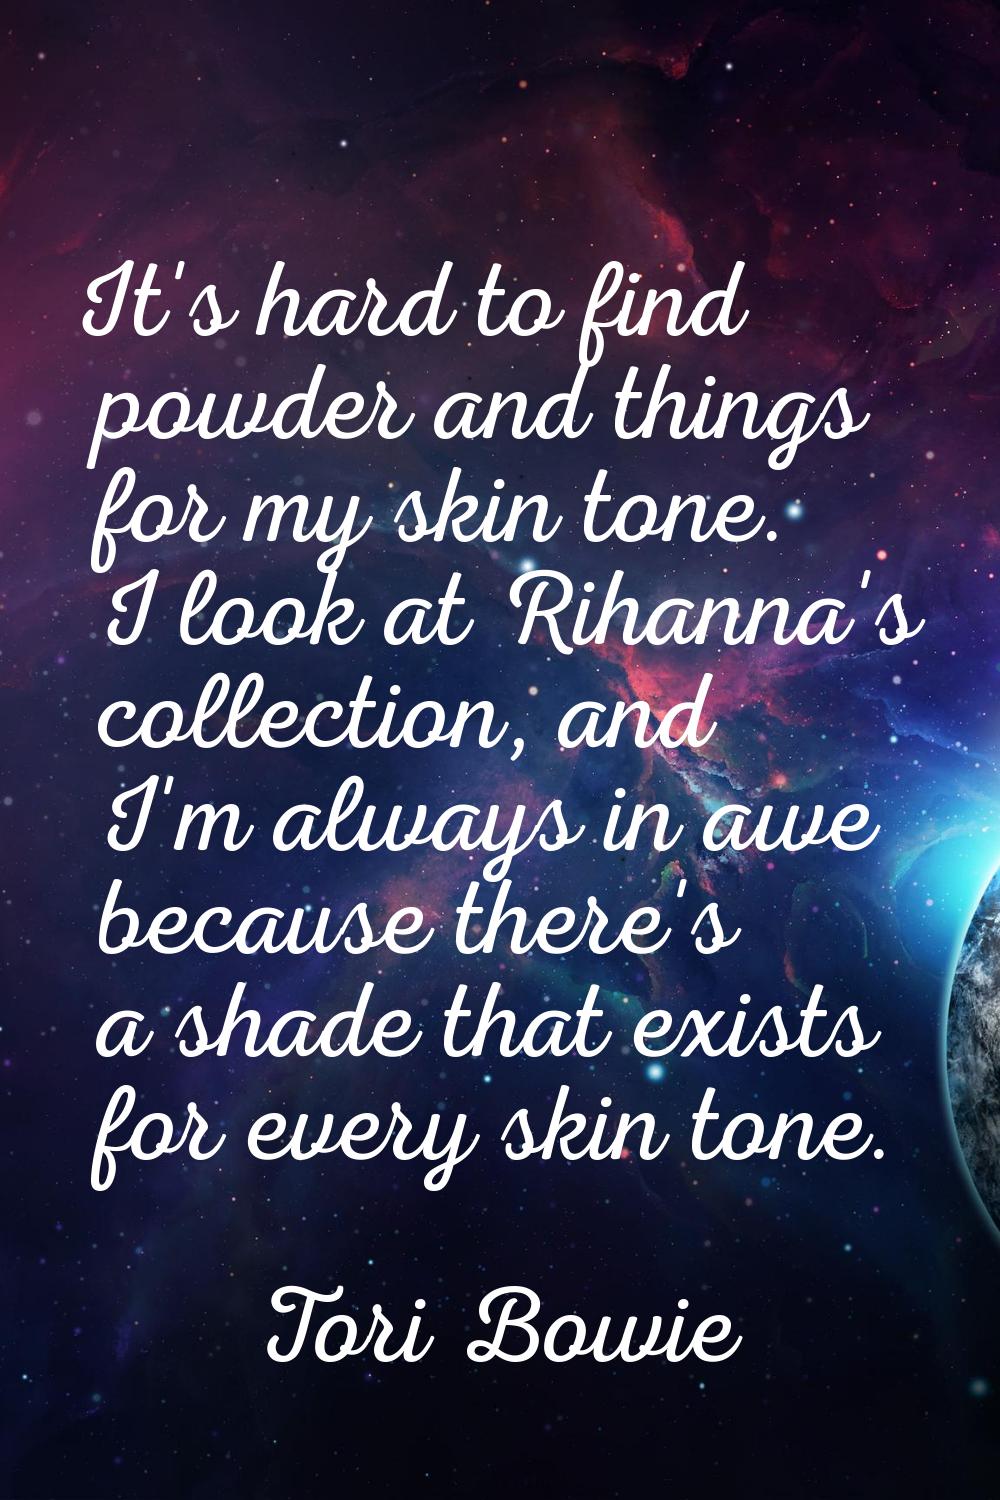 It's hard to find powder and things for my skin tone. I look at Rihanna's collection, and I'm alway